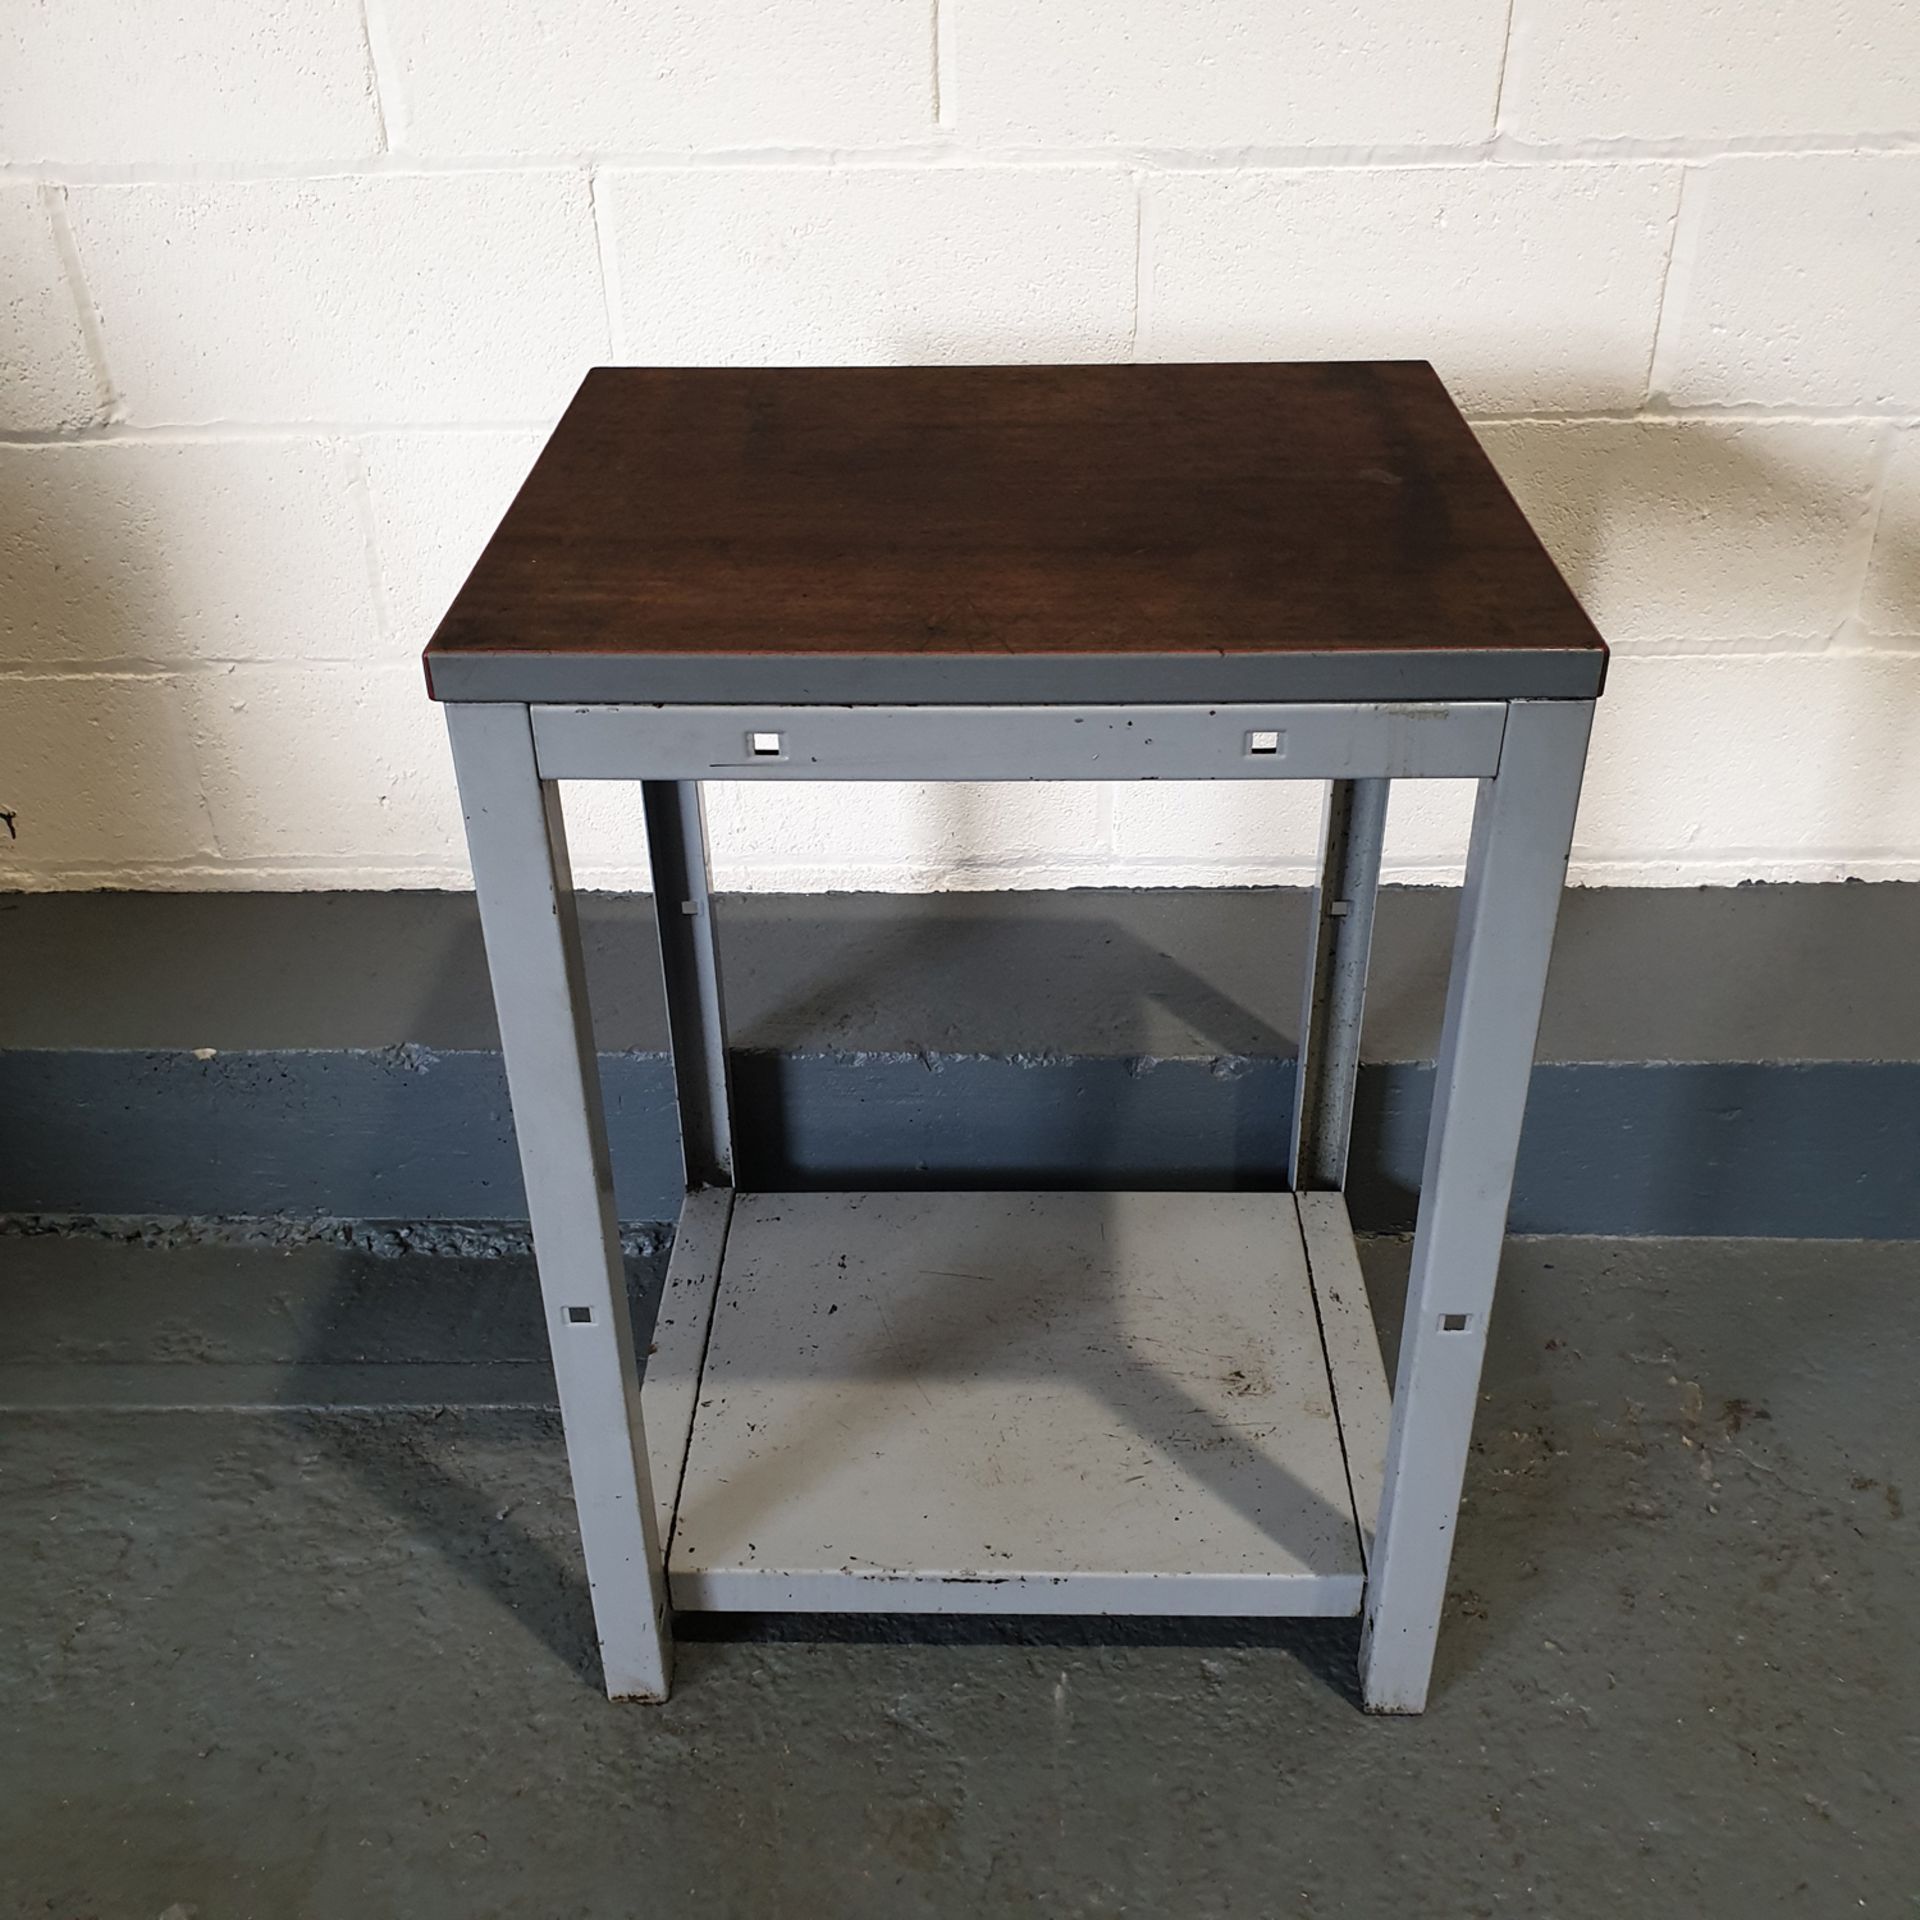 Steel Table with wood Surface. Approx Dimensions 600mm x 500mm x 830mm High.